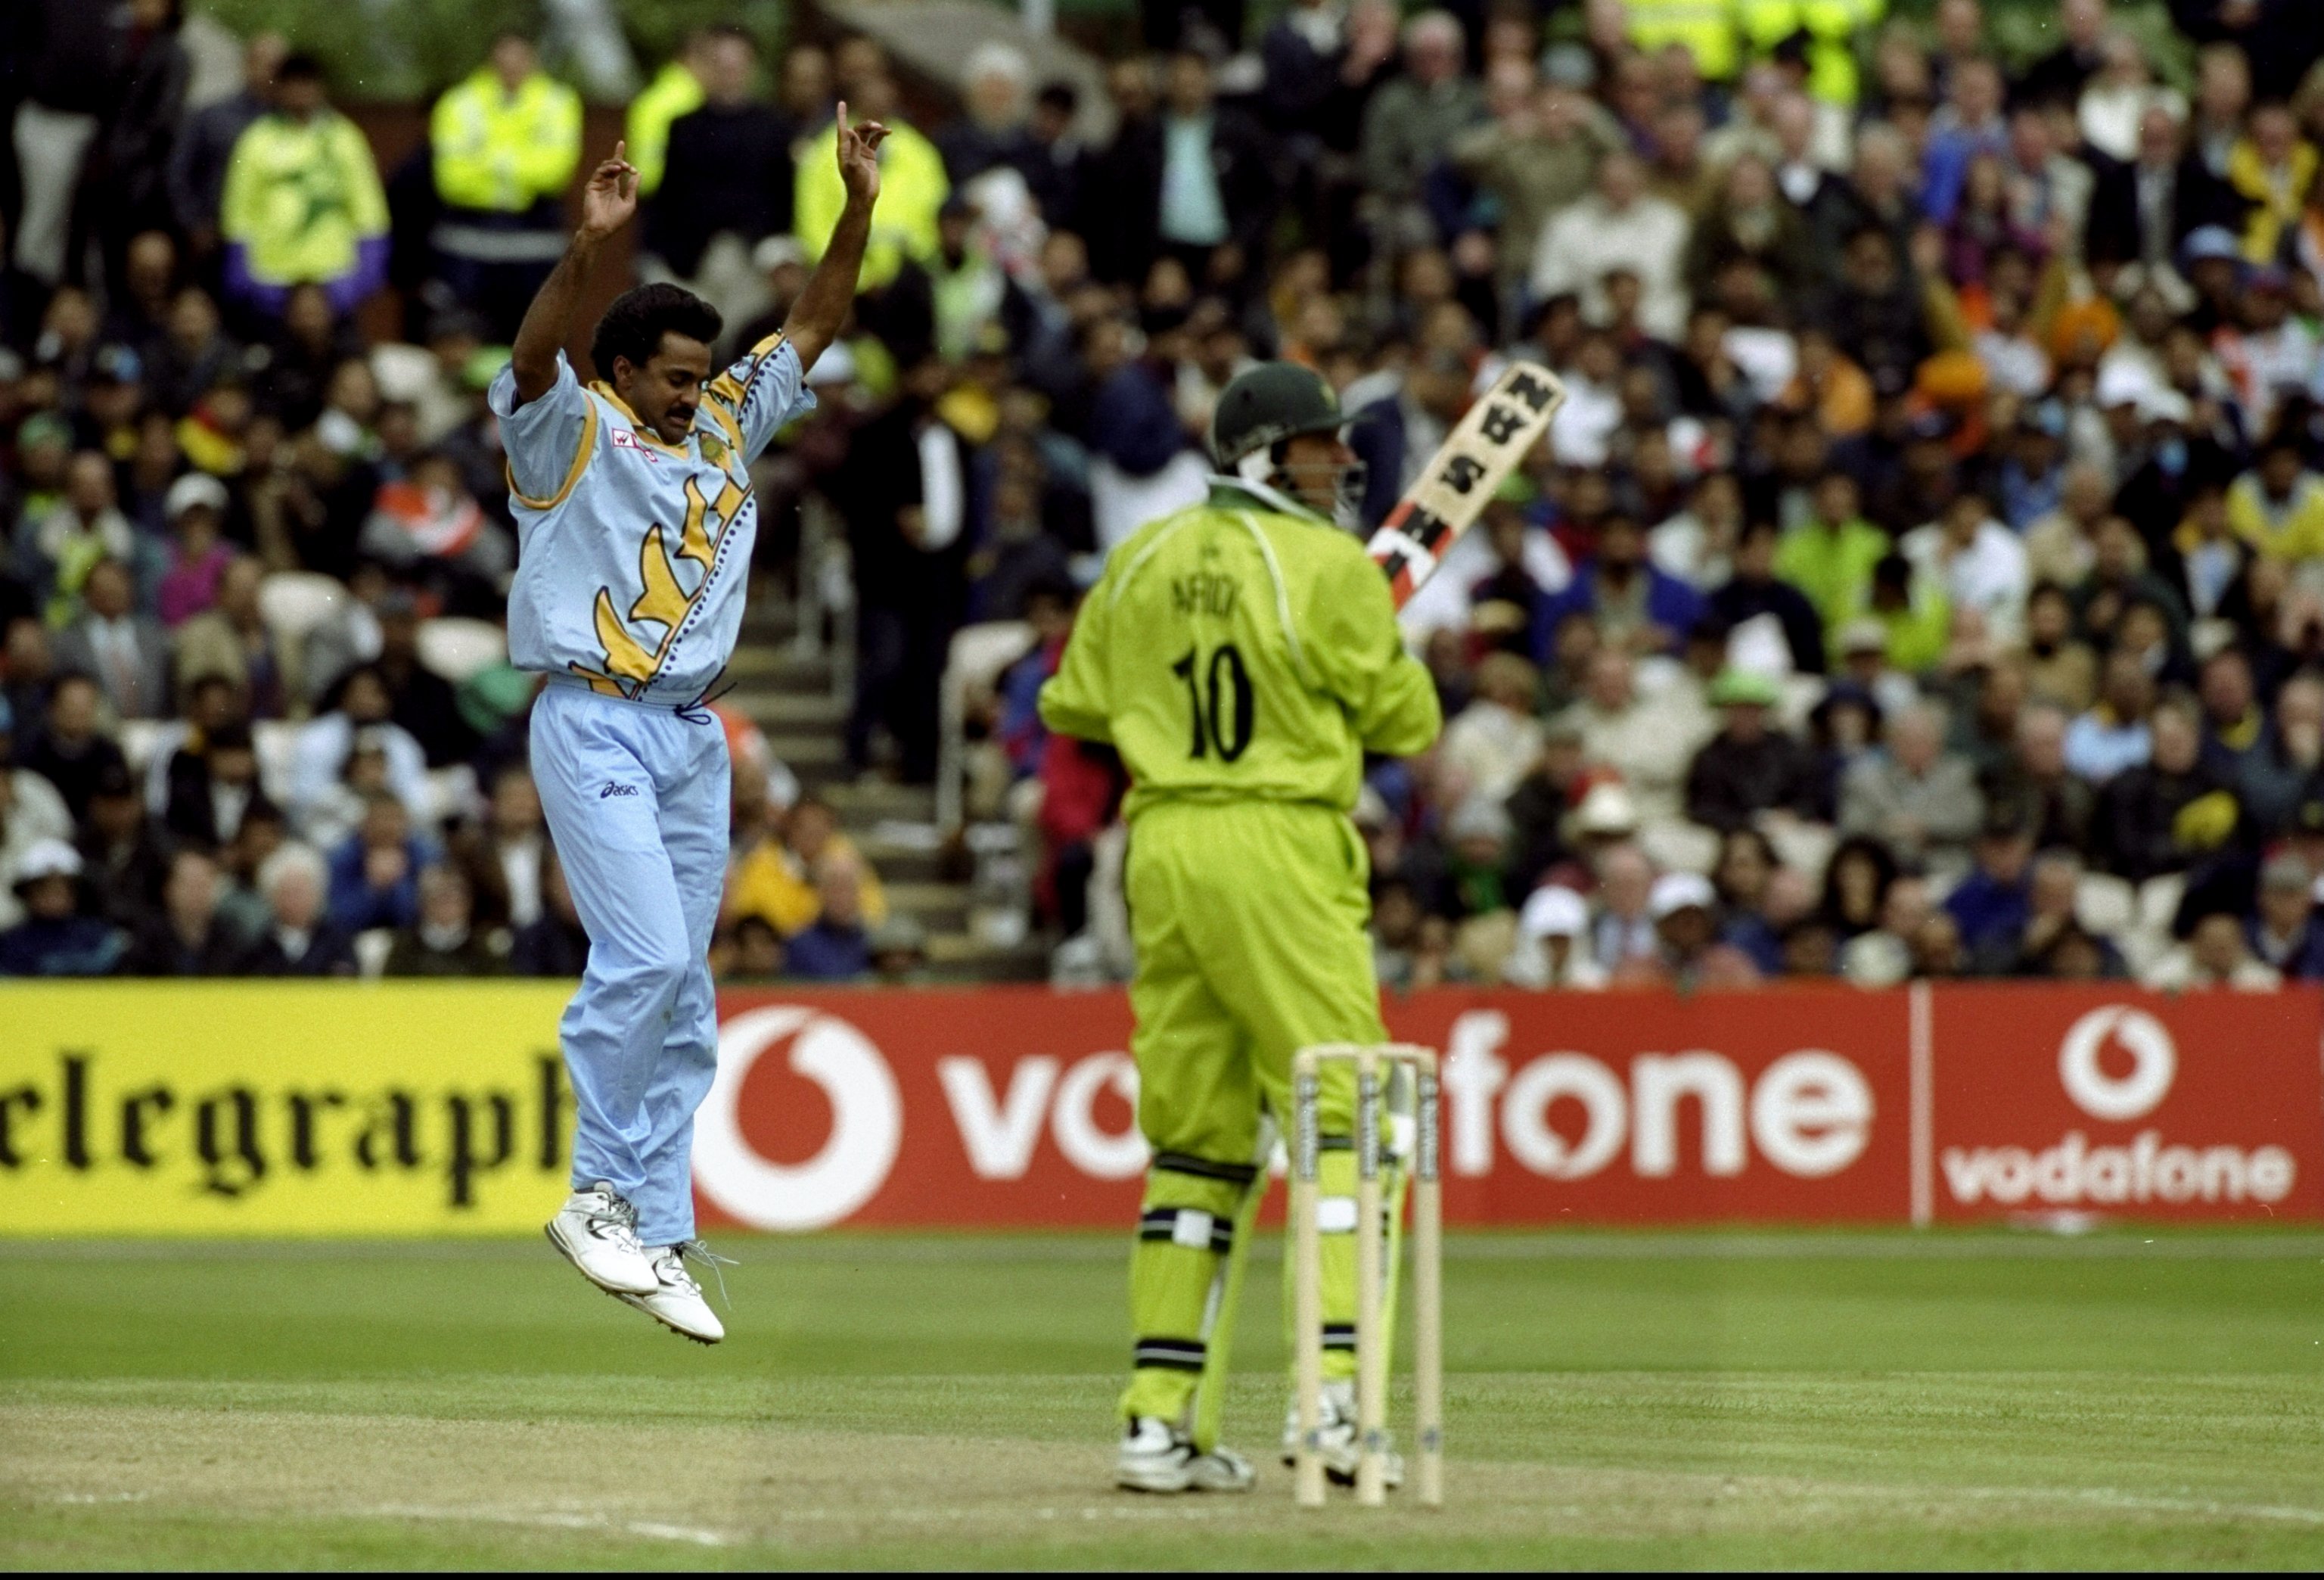 Winning the 2003 WC final could have been feather in my career, reckons Javagal Srinath